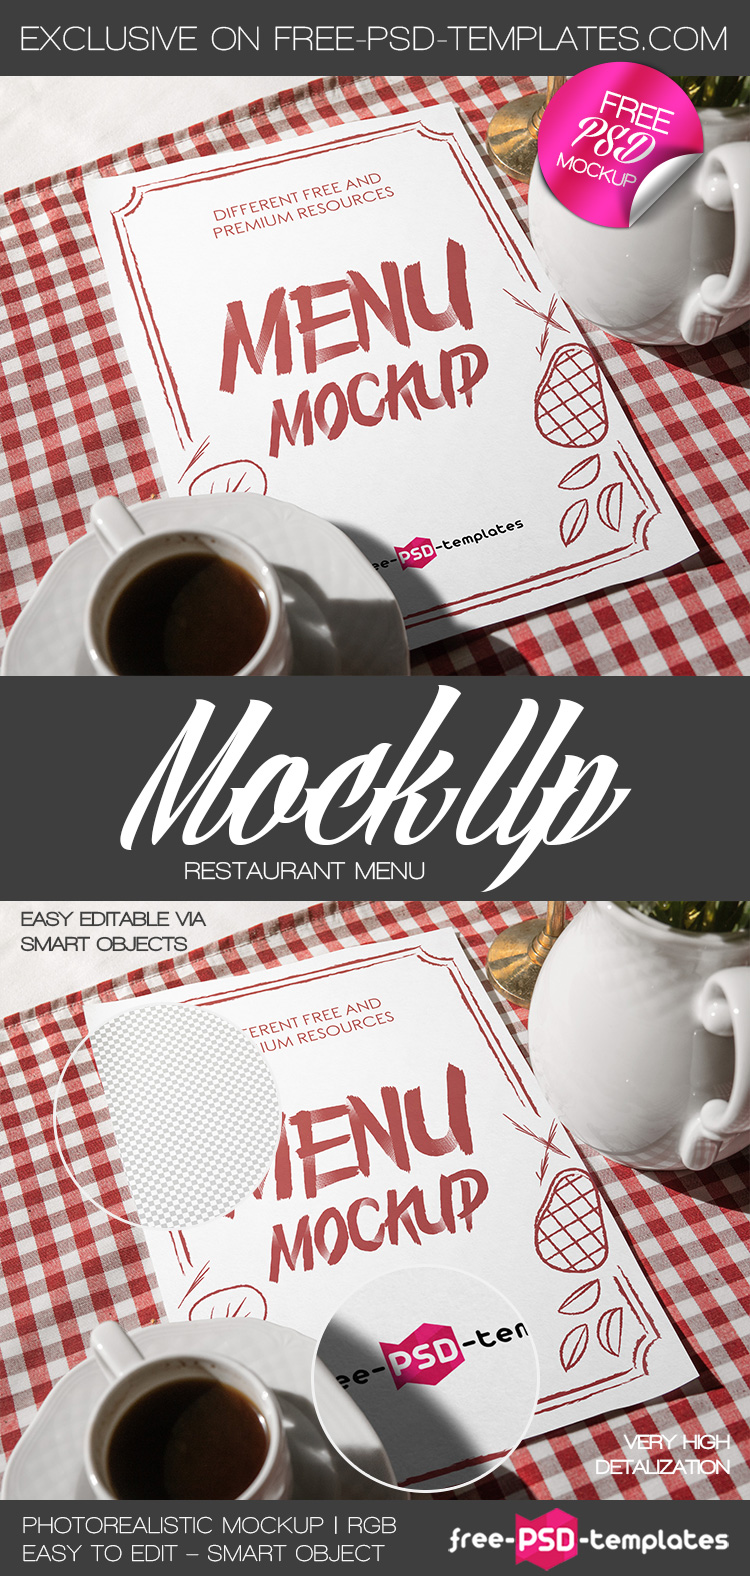 Download Free Restaurant Menu Mock-up in PSD | Free PSD Templates